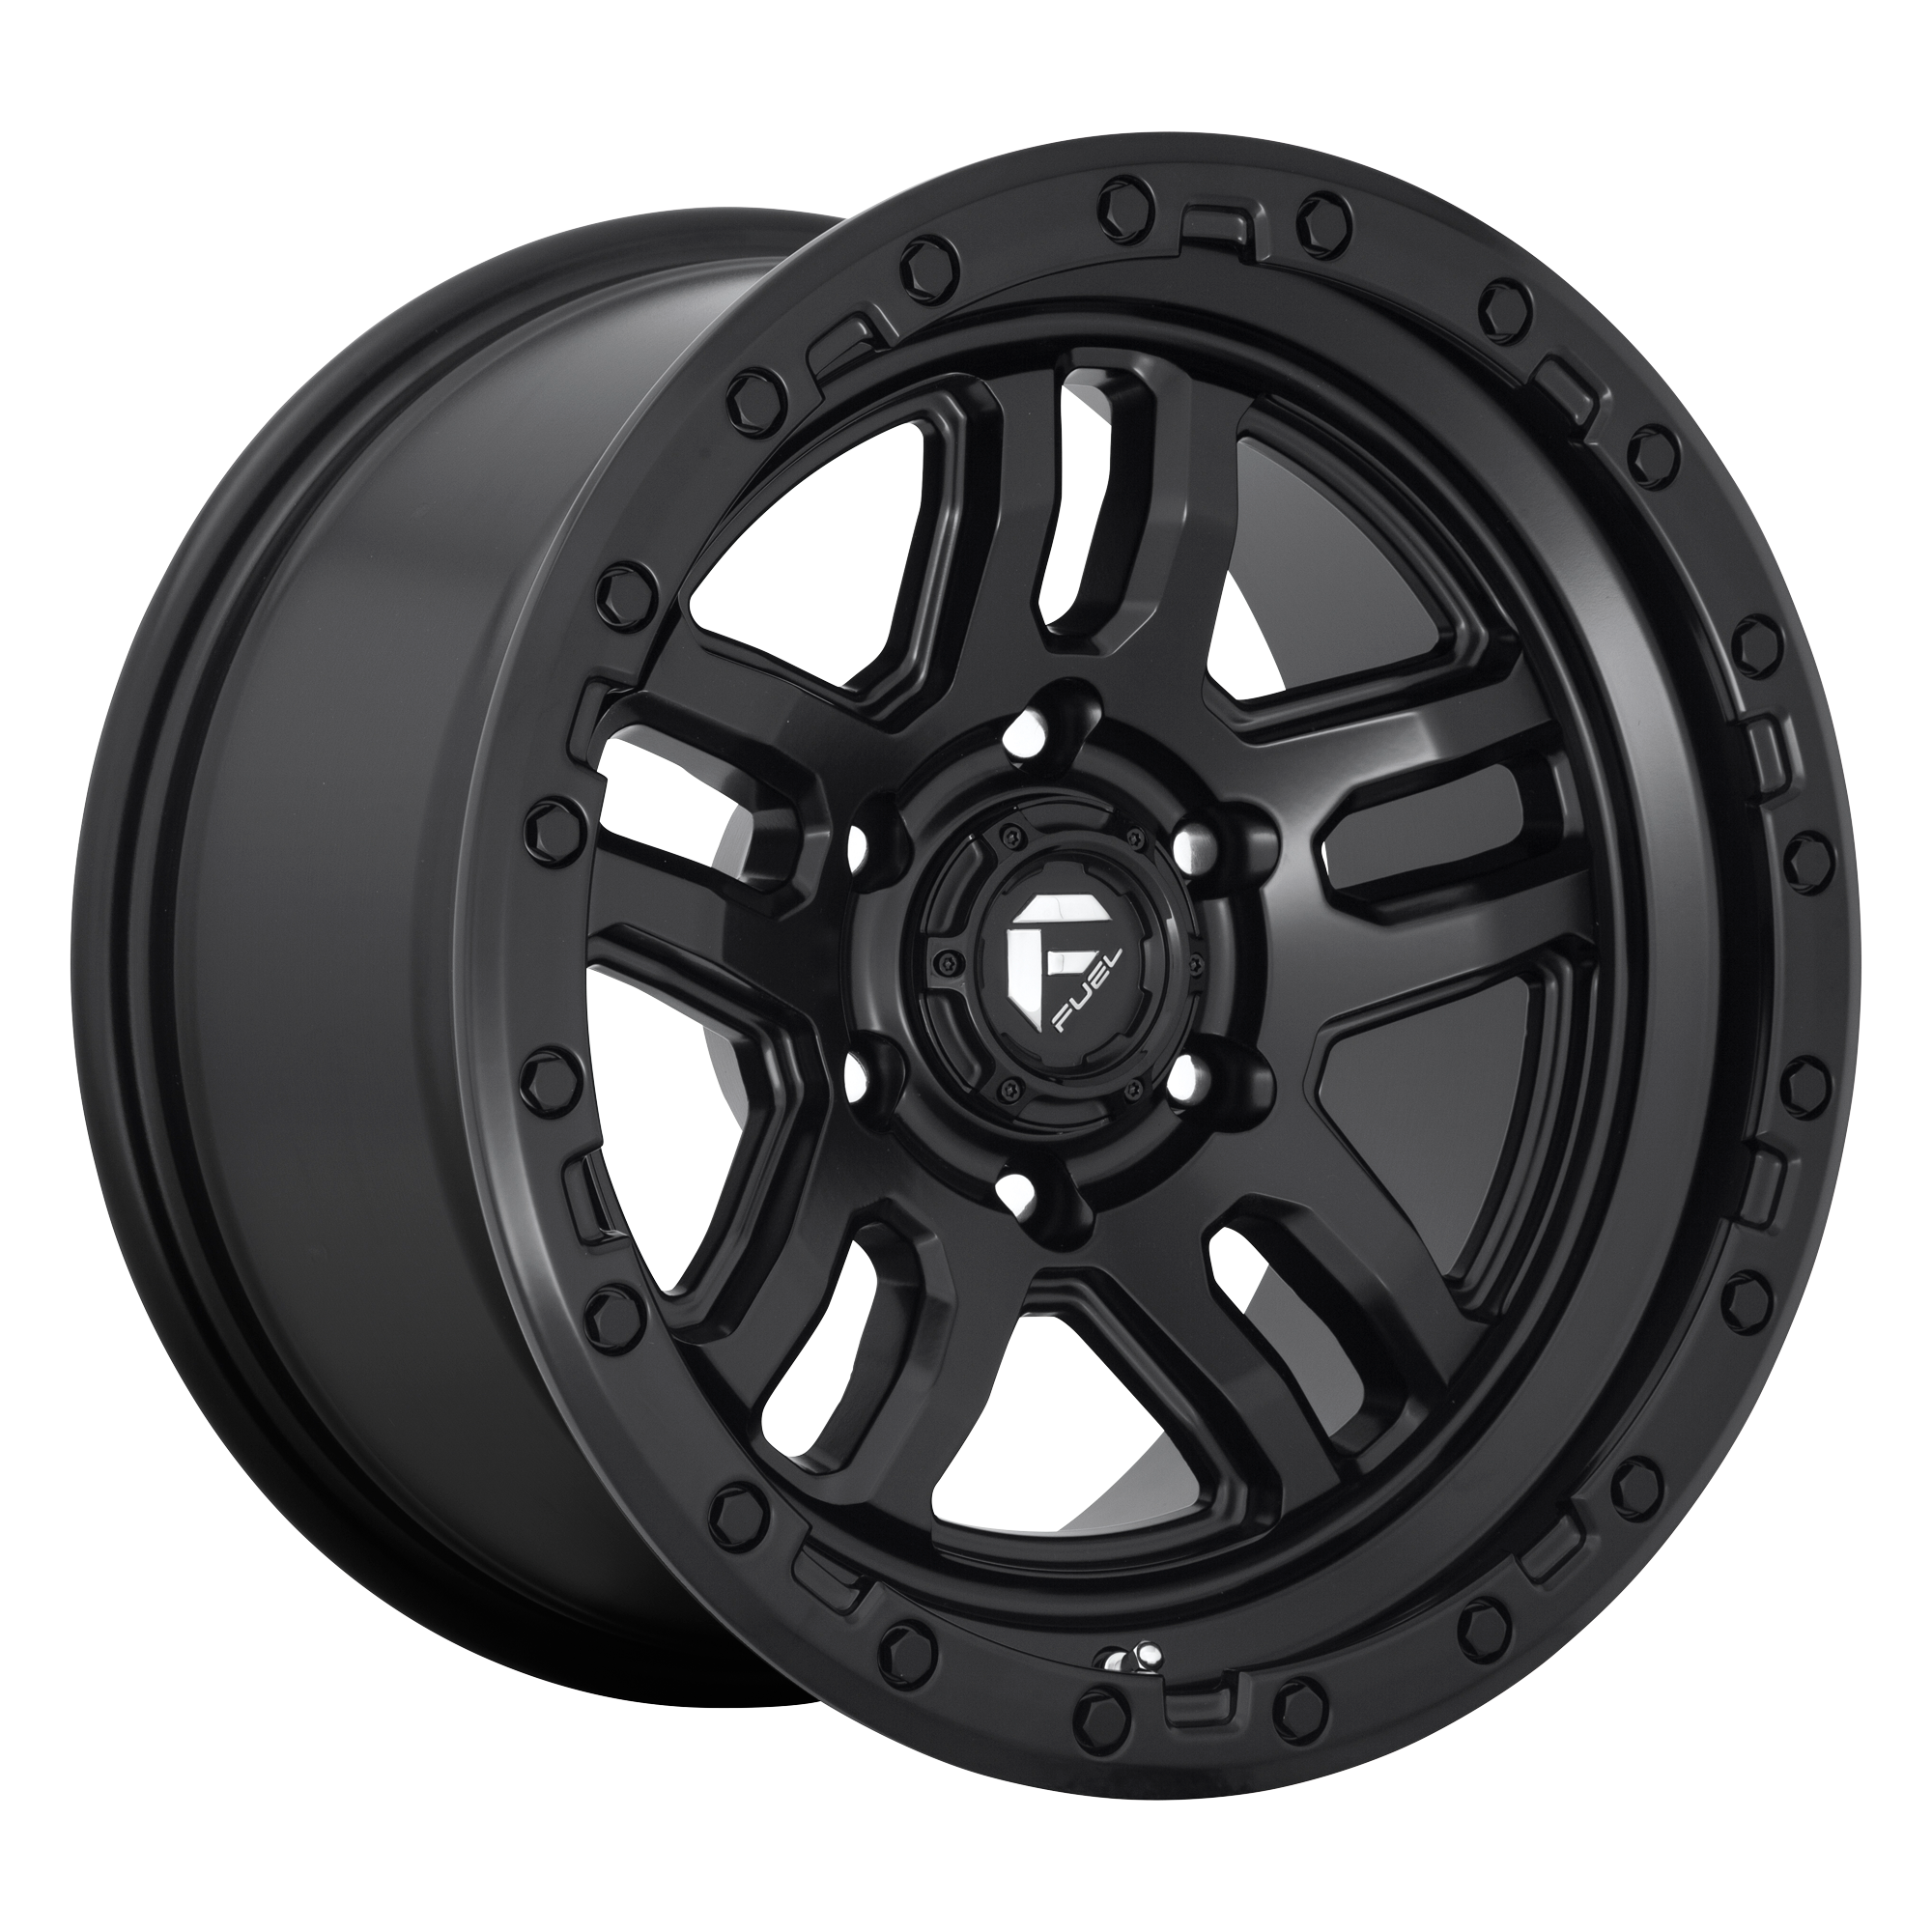 AMMO 17x9 6x135.00 MATTE BLACK (-12 mm) - Tires and Engine Performance